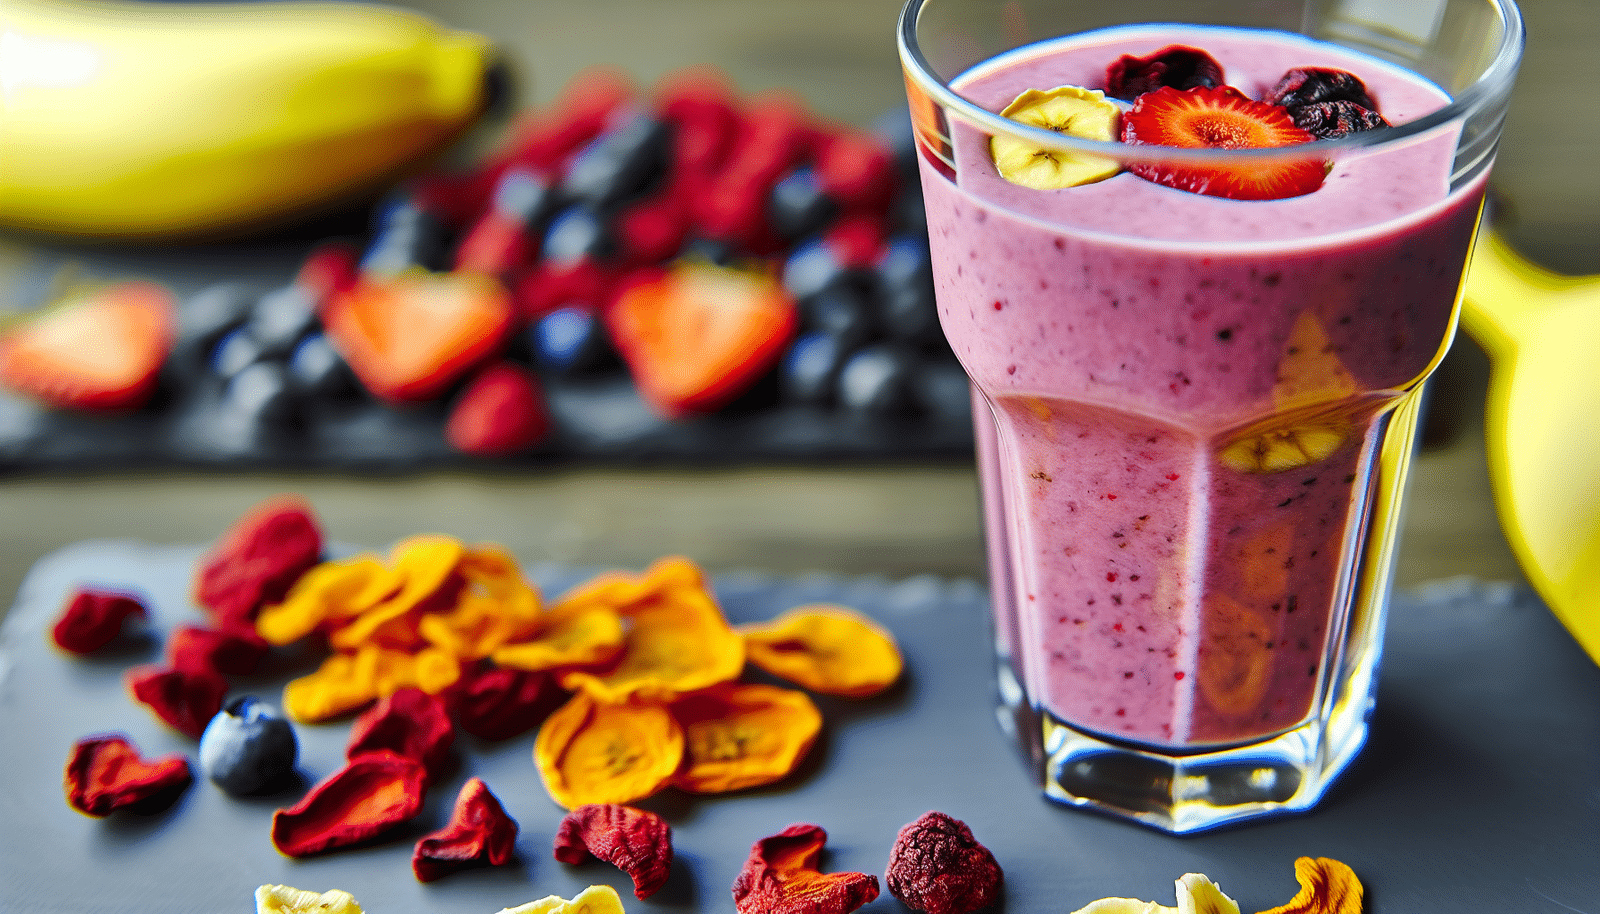 A colorful smoothie made with freeze dried fruits